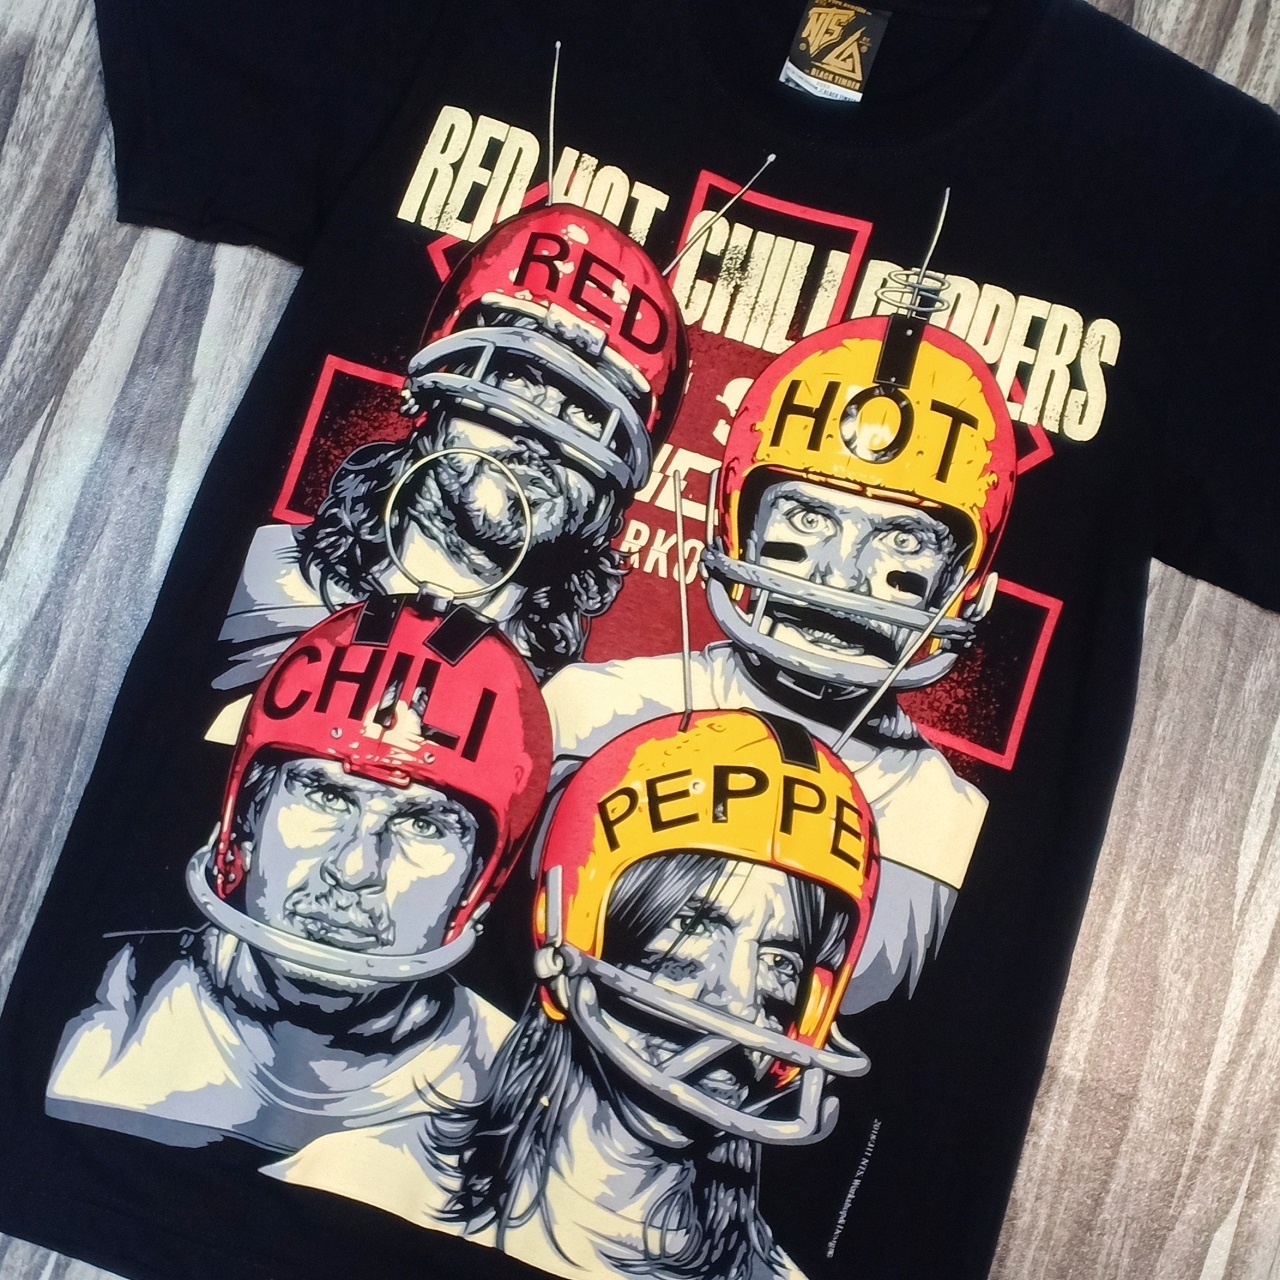 18R311 RED HOT CHILI PEPPERS PUNK ROCK BAND RHCP AMERICAN FOOTBALLER COVER  NTS ORIGINAL NEW TYPE SYSTEM COTTON T-SHIRT – PREMIUM GRADE BLACK TIMBER  NEW TYPE SYSTEM MOAI SPEED HIGH QUALITY SILK